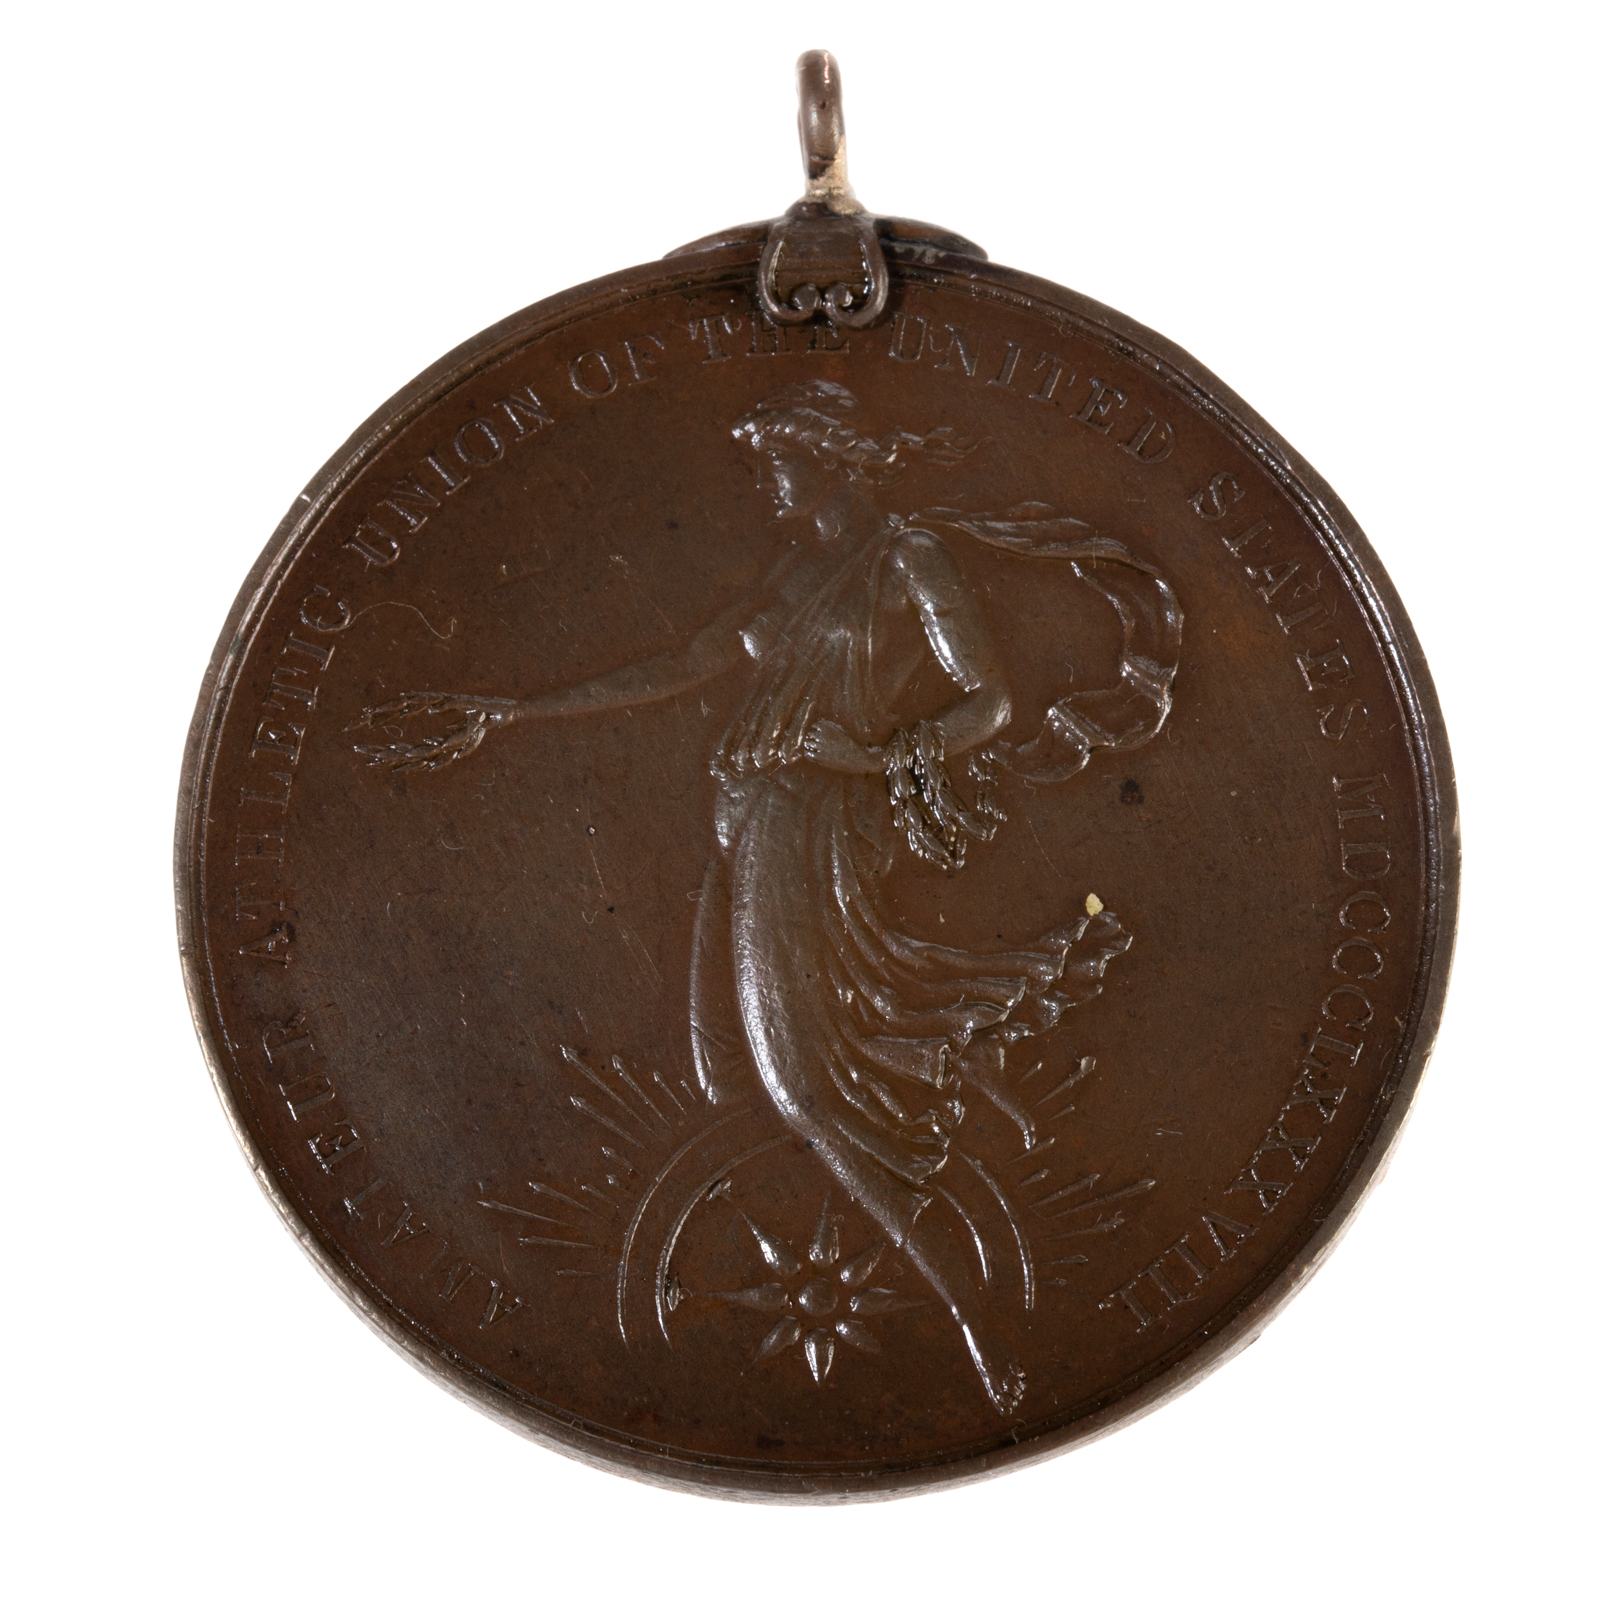 A.A.U. AWARD MEDAL GIVEN IN 1906